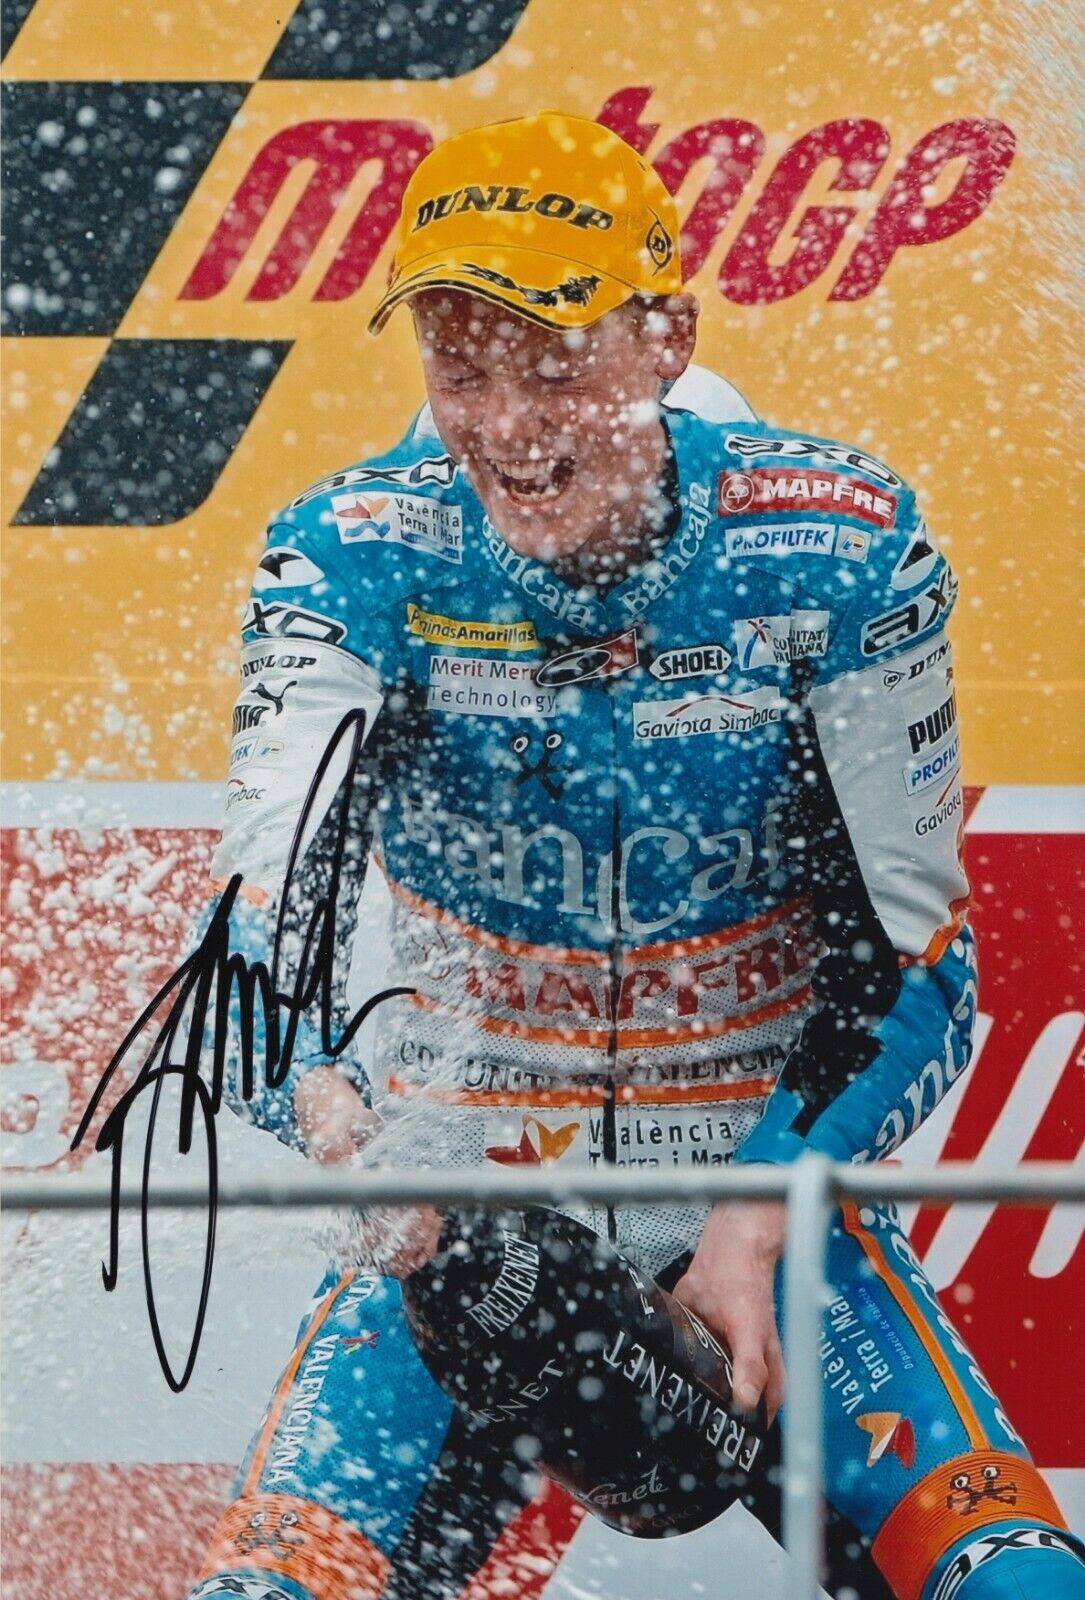 Bradley Smith Hand Signed 12x8 Photo Poster painting - MotoGP Autograph 4.